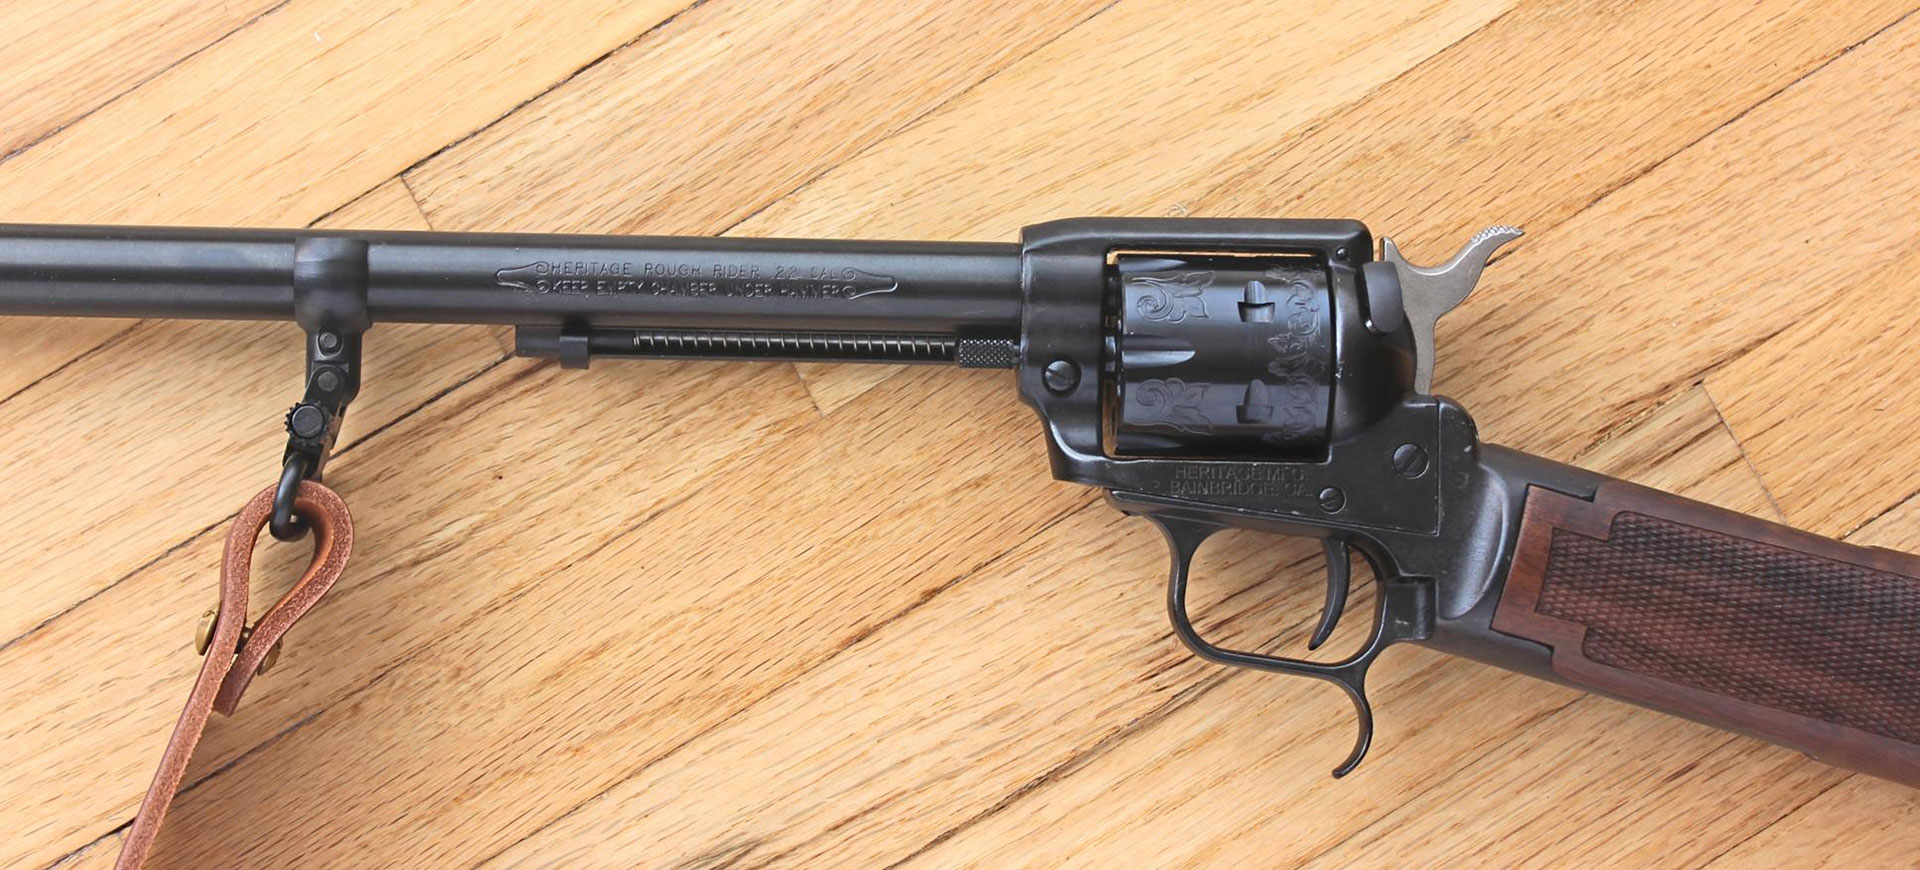 The engraved cylinders add a subtle, but noticeable decorative touch to the finished revolver carbine.